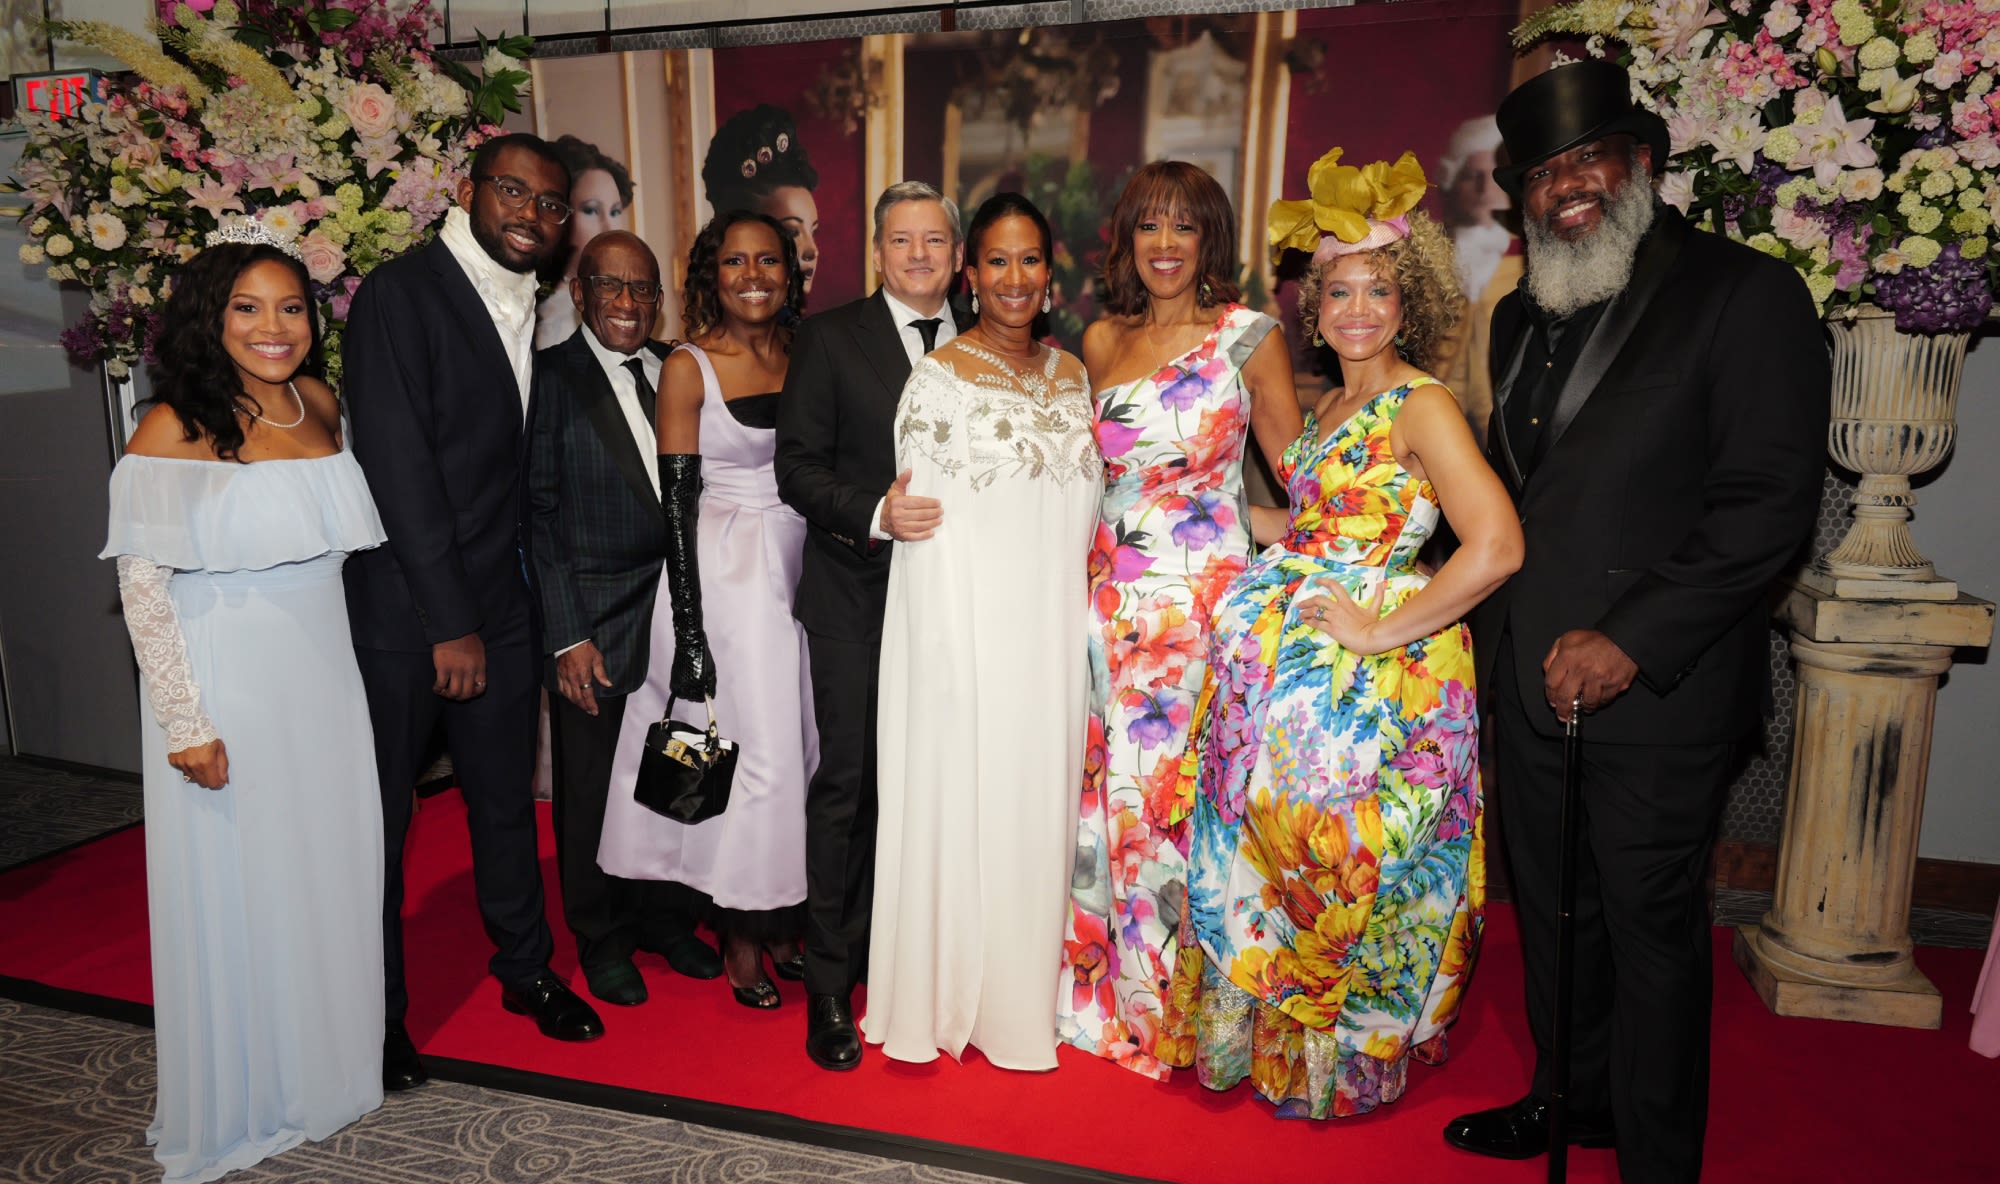 Gayle King, Al Roker and More Celebrate 60 Years of Harlem School of the Arts With ‘Bridgerton’ Themed Charity Gala, $2.5 Million Raised